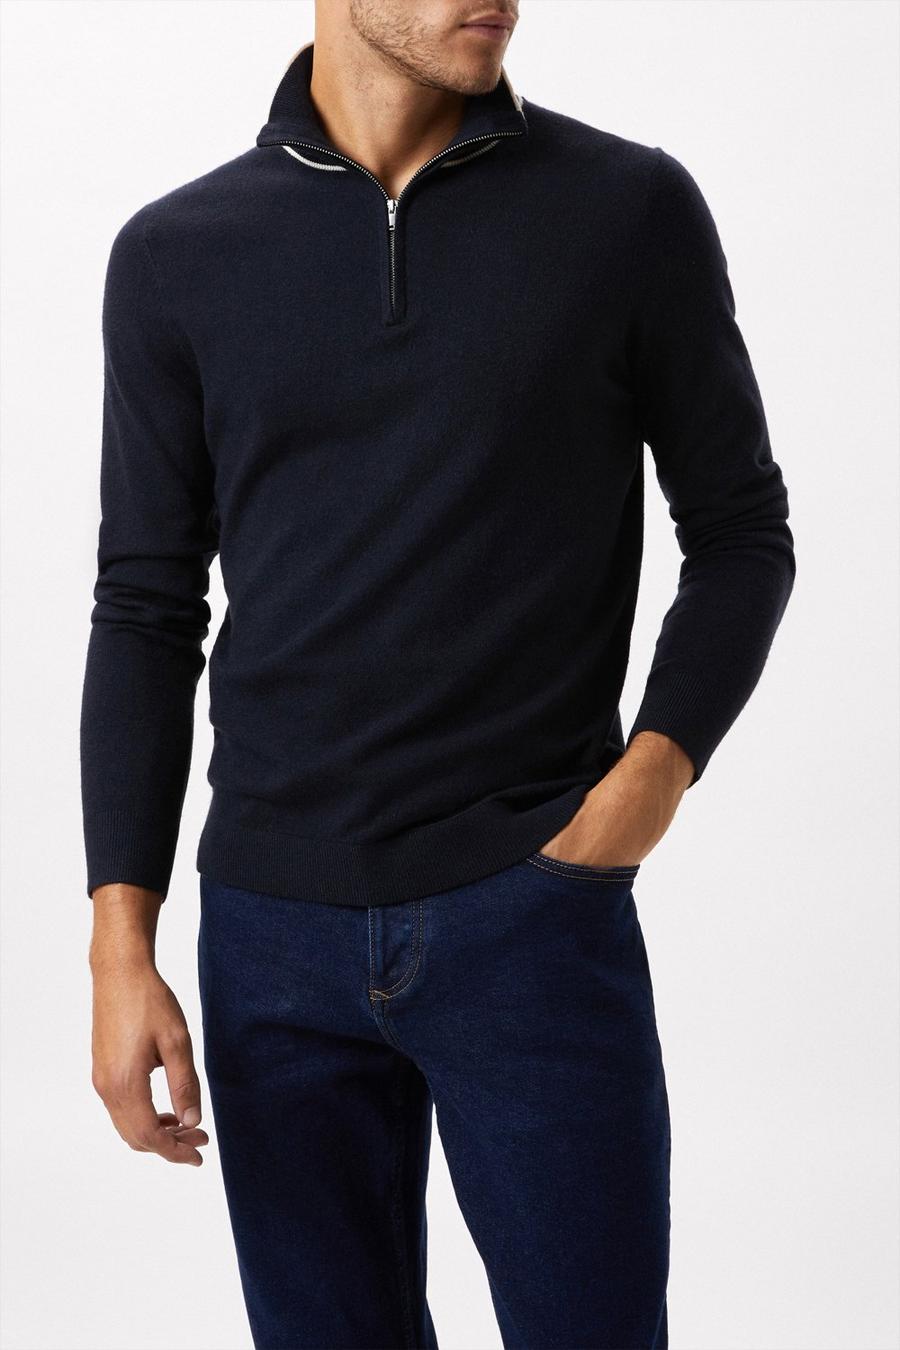 Super Soft Navy Tipped 1/4 Zip Knitted Funnel